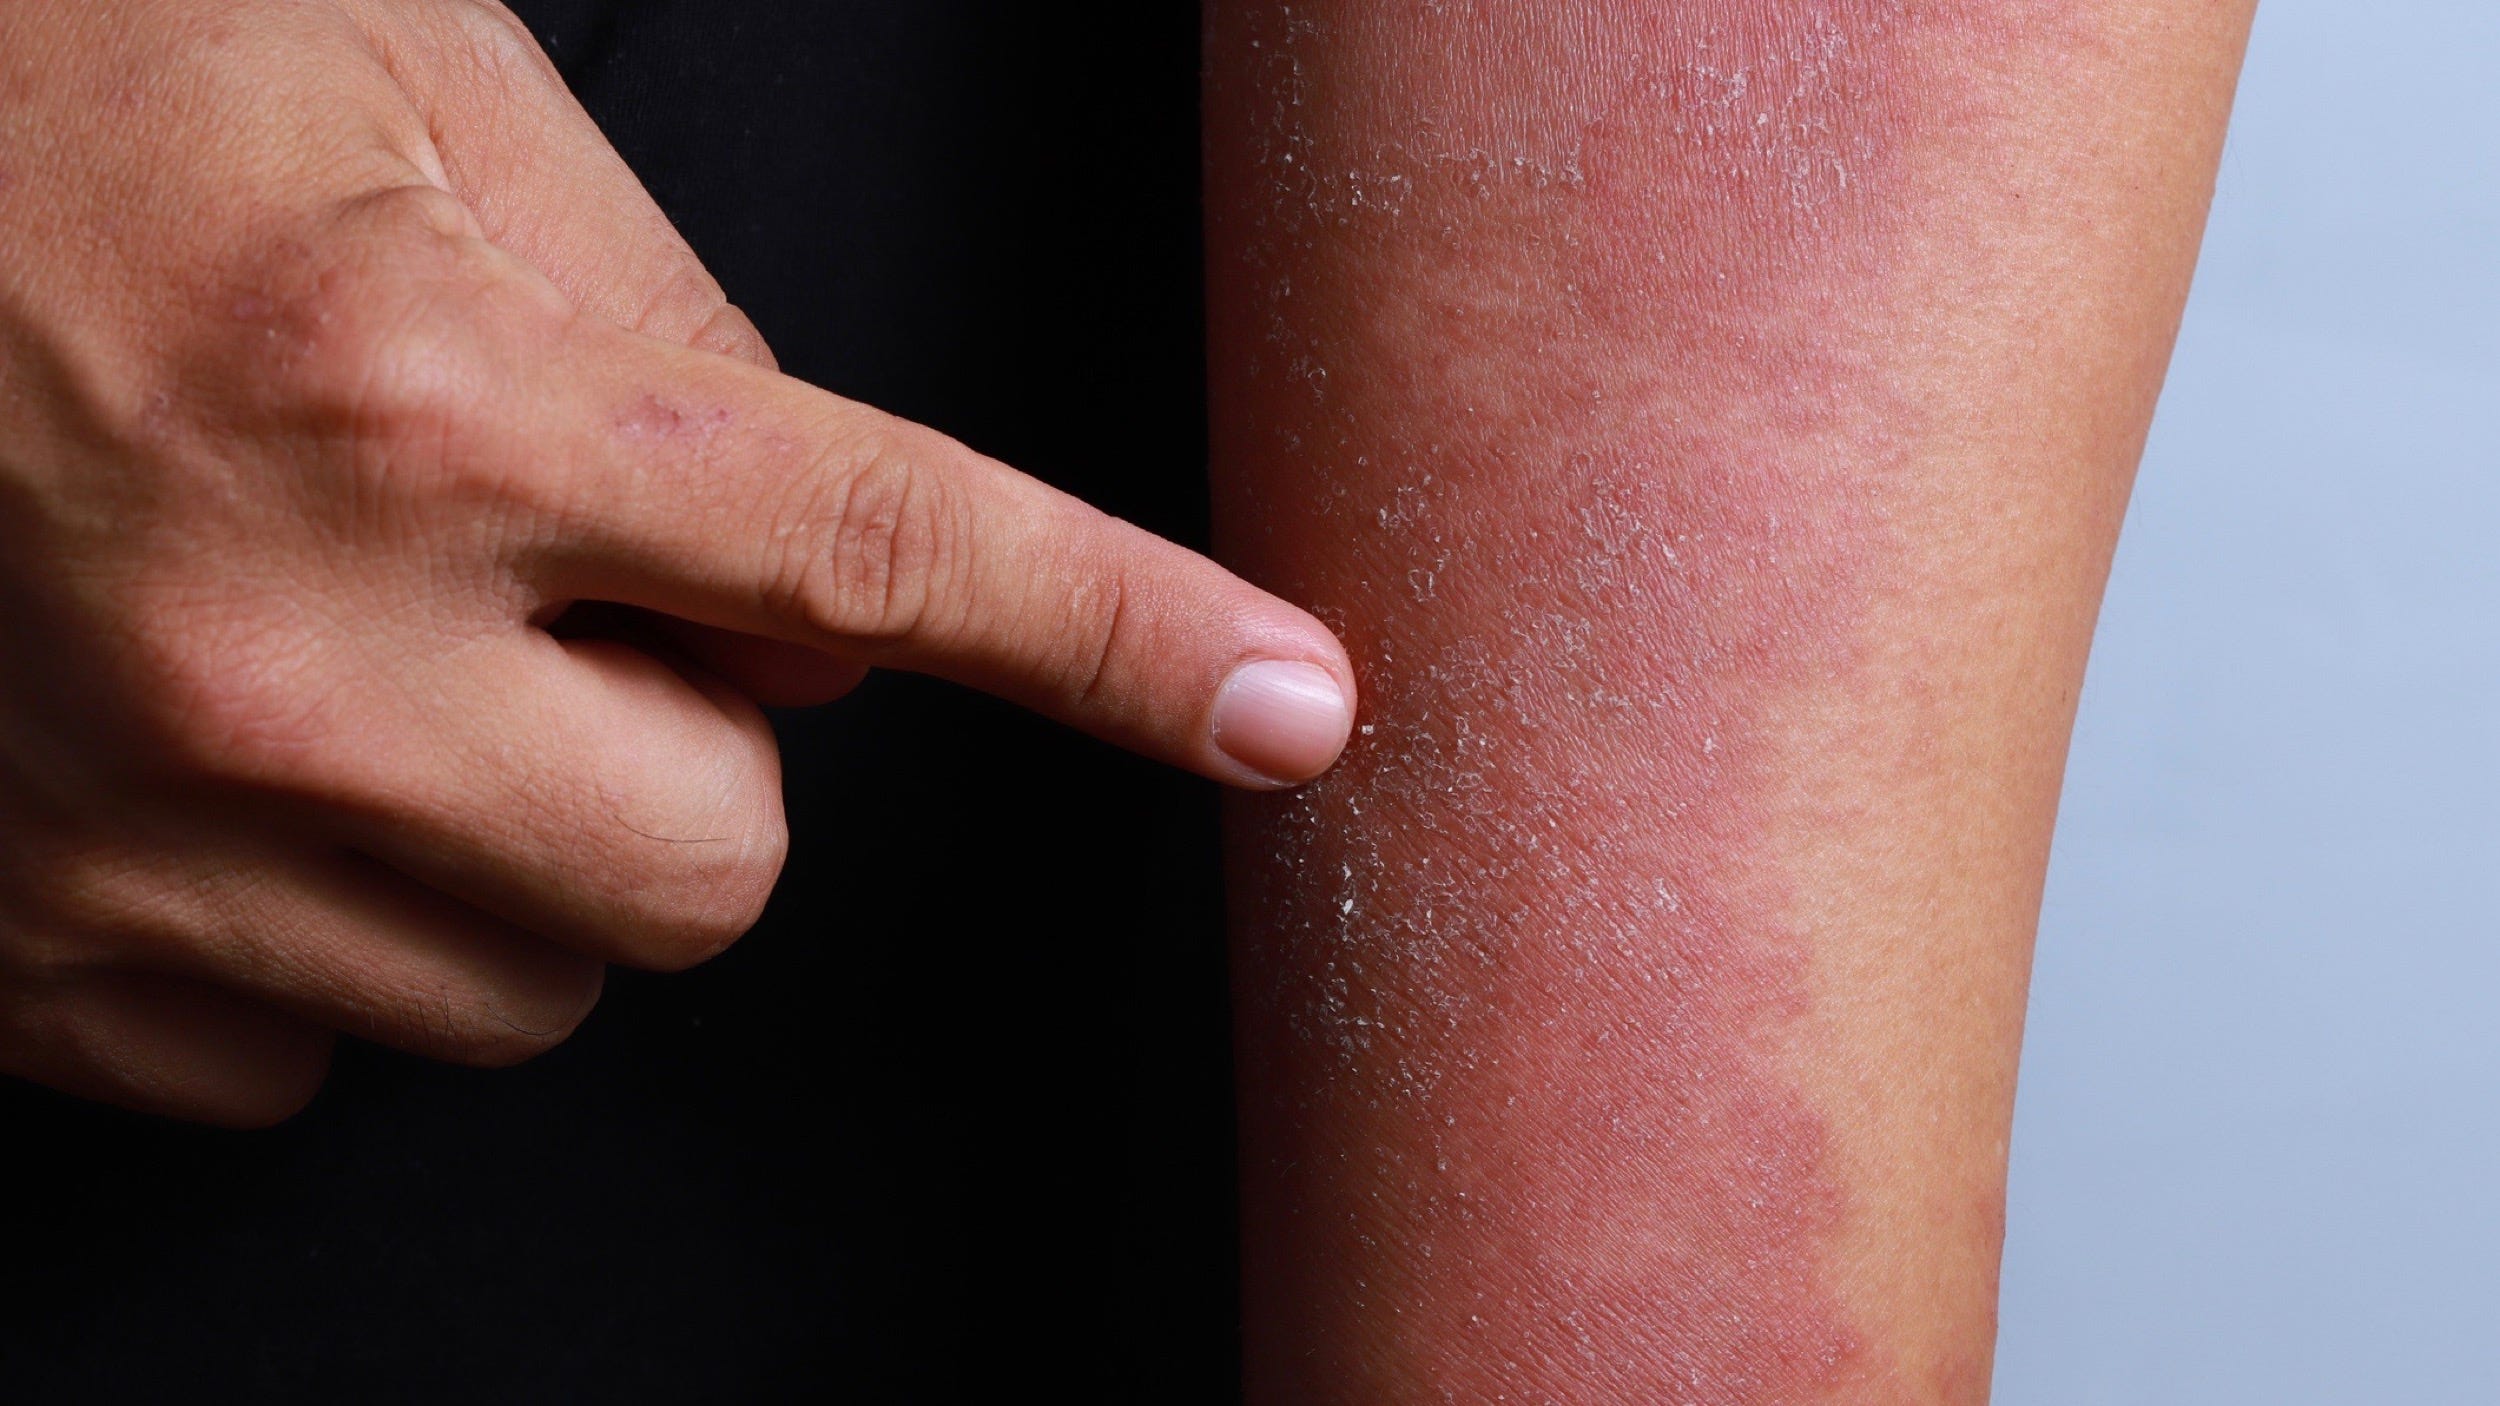 3 ways to get rid of eczema and prevent flare ups